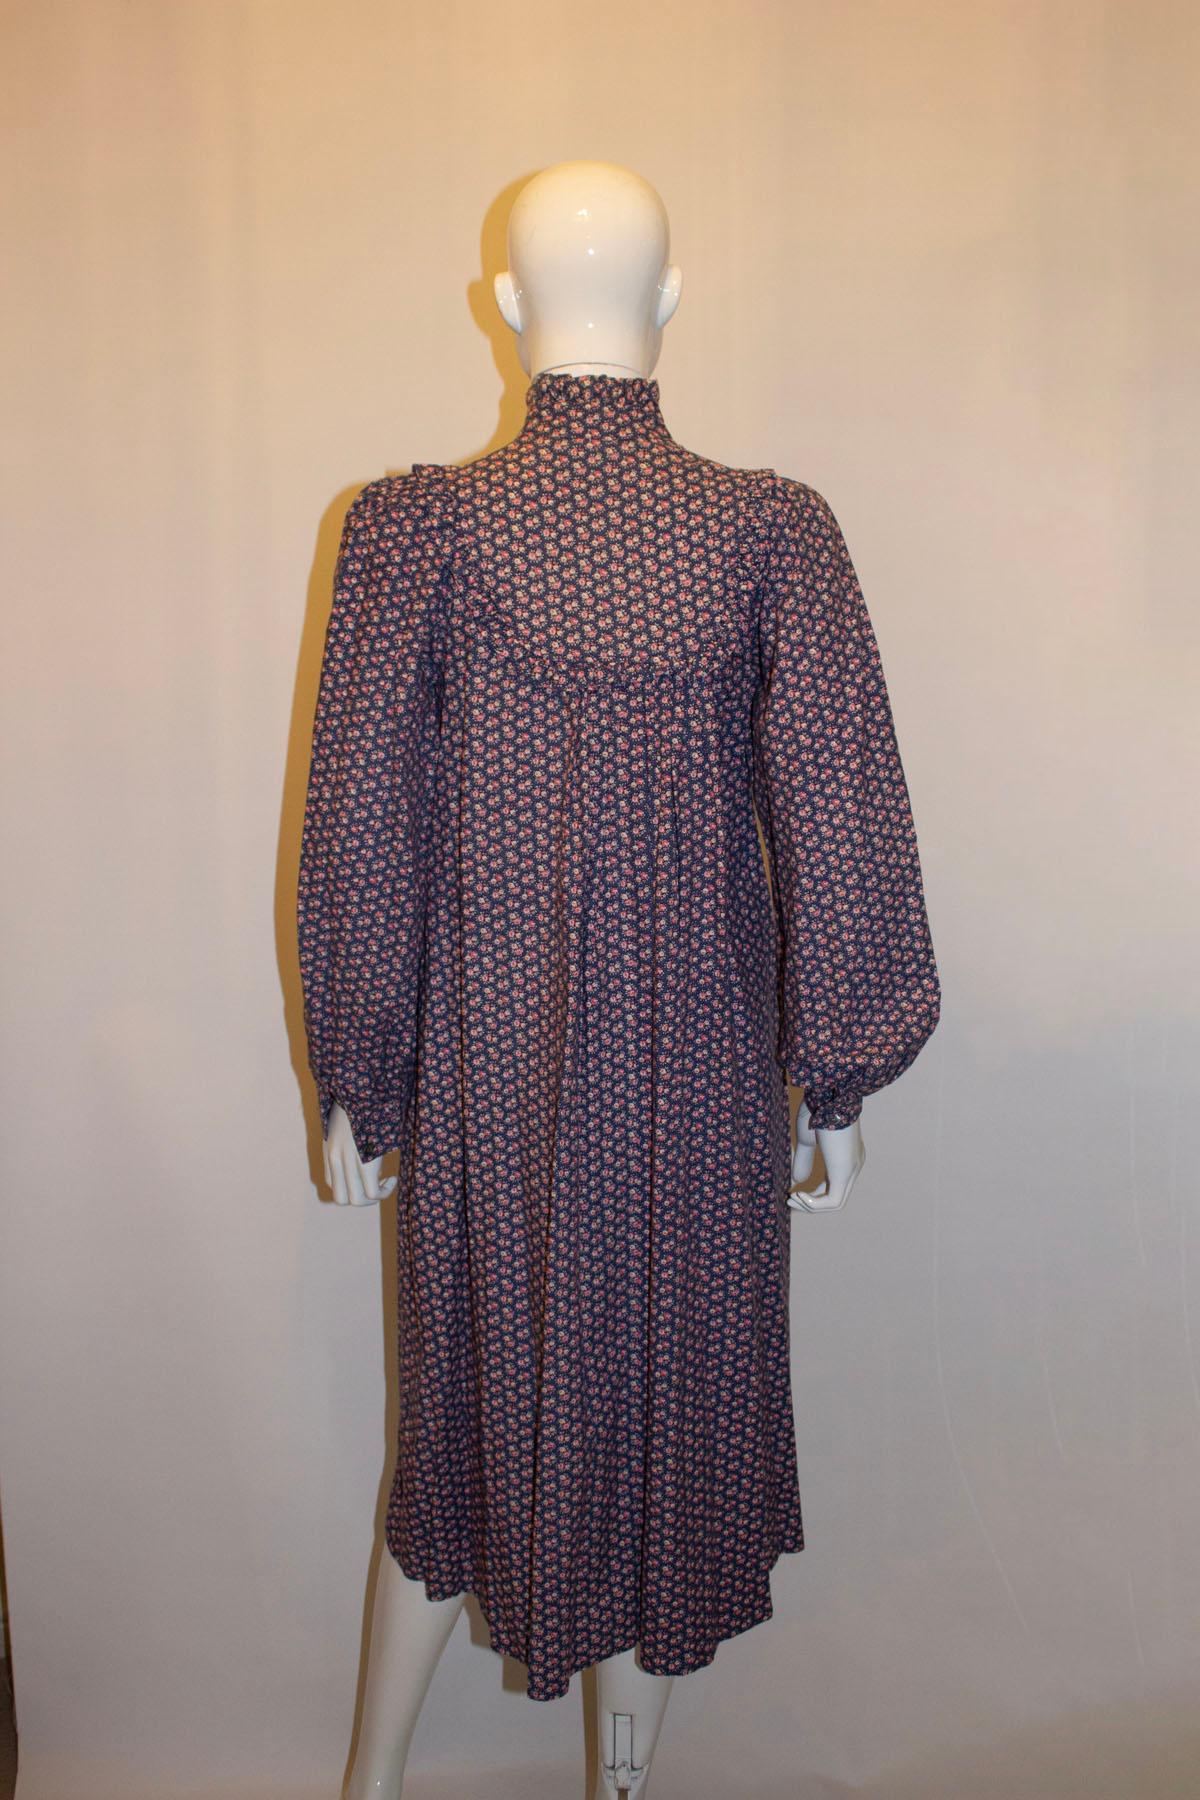 Vintage Early Laura Ashley Floral Cotton Smock Dress In Good Condition For Sale In London, GB